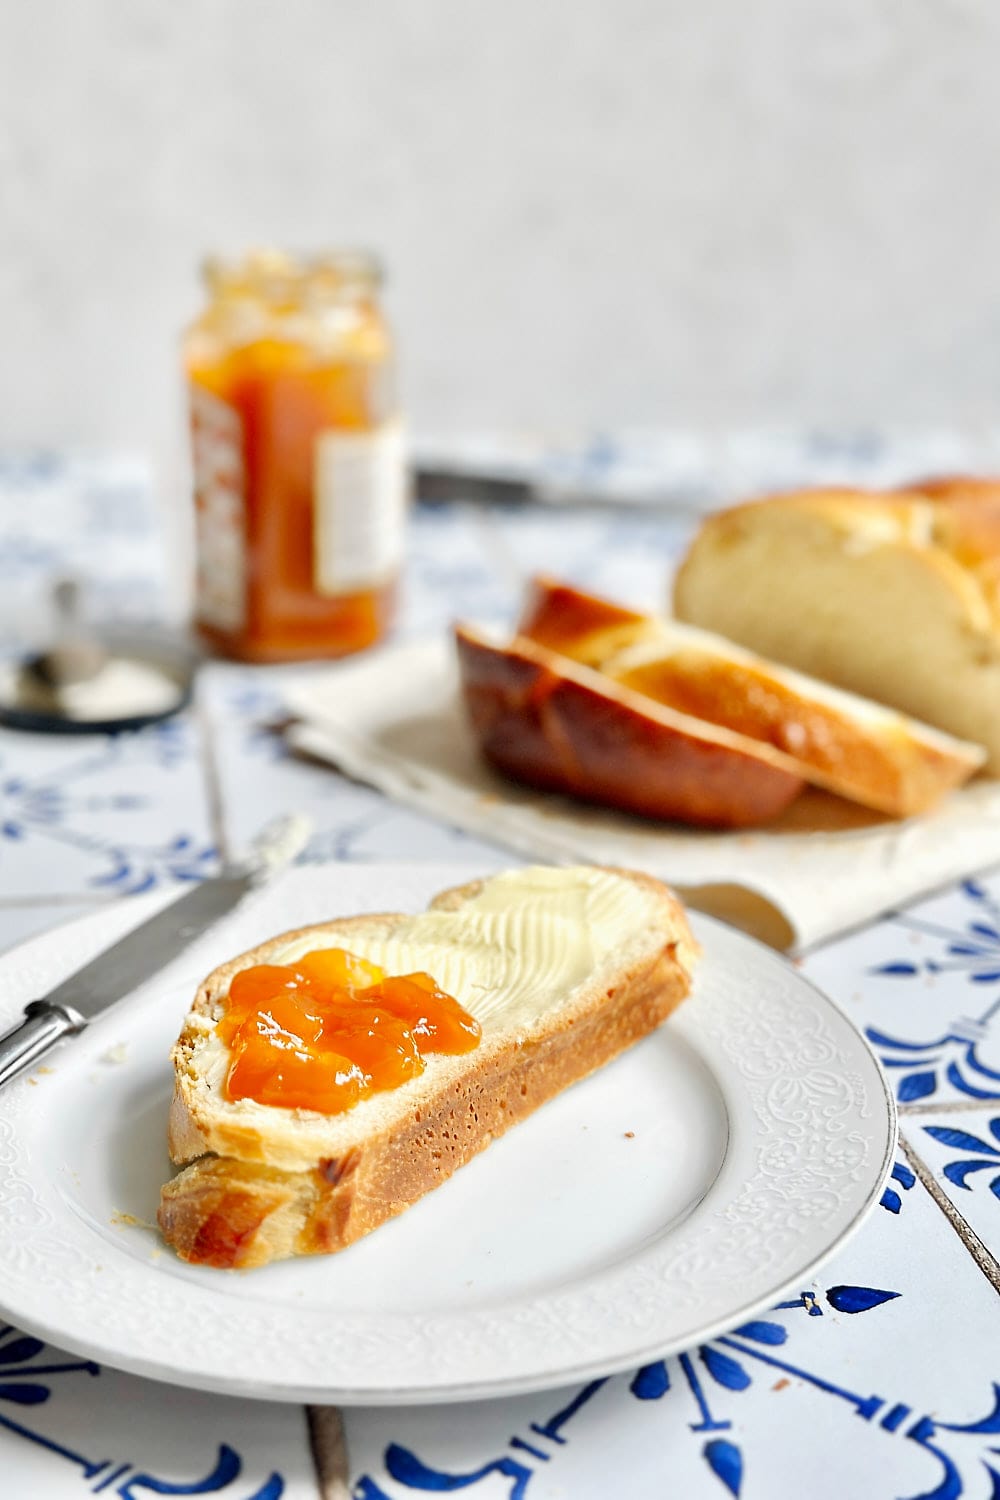 A slice of soft and sweet sourdough bread with butter and apricot jam.